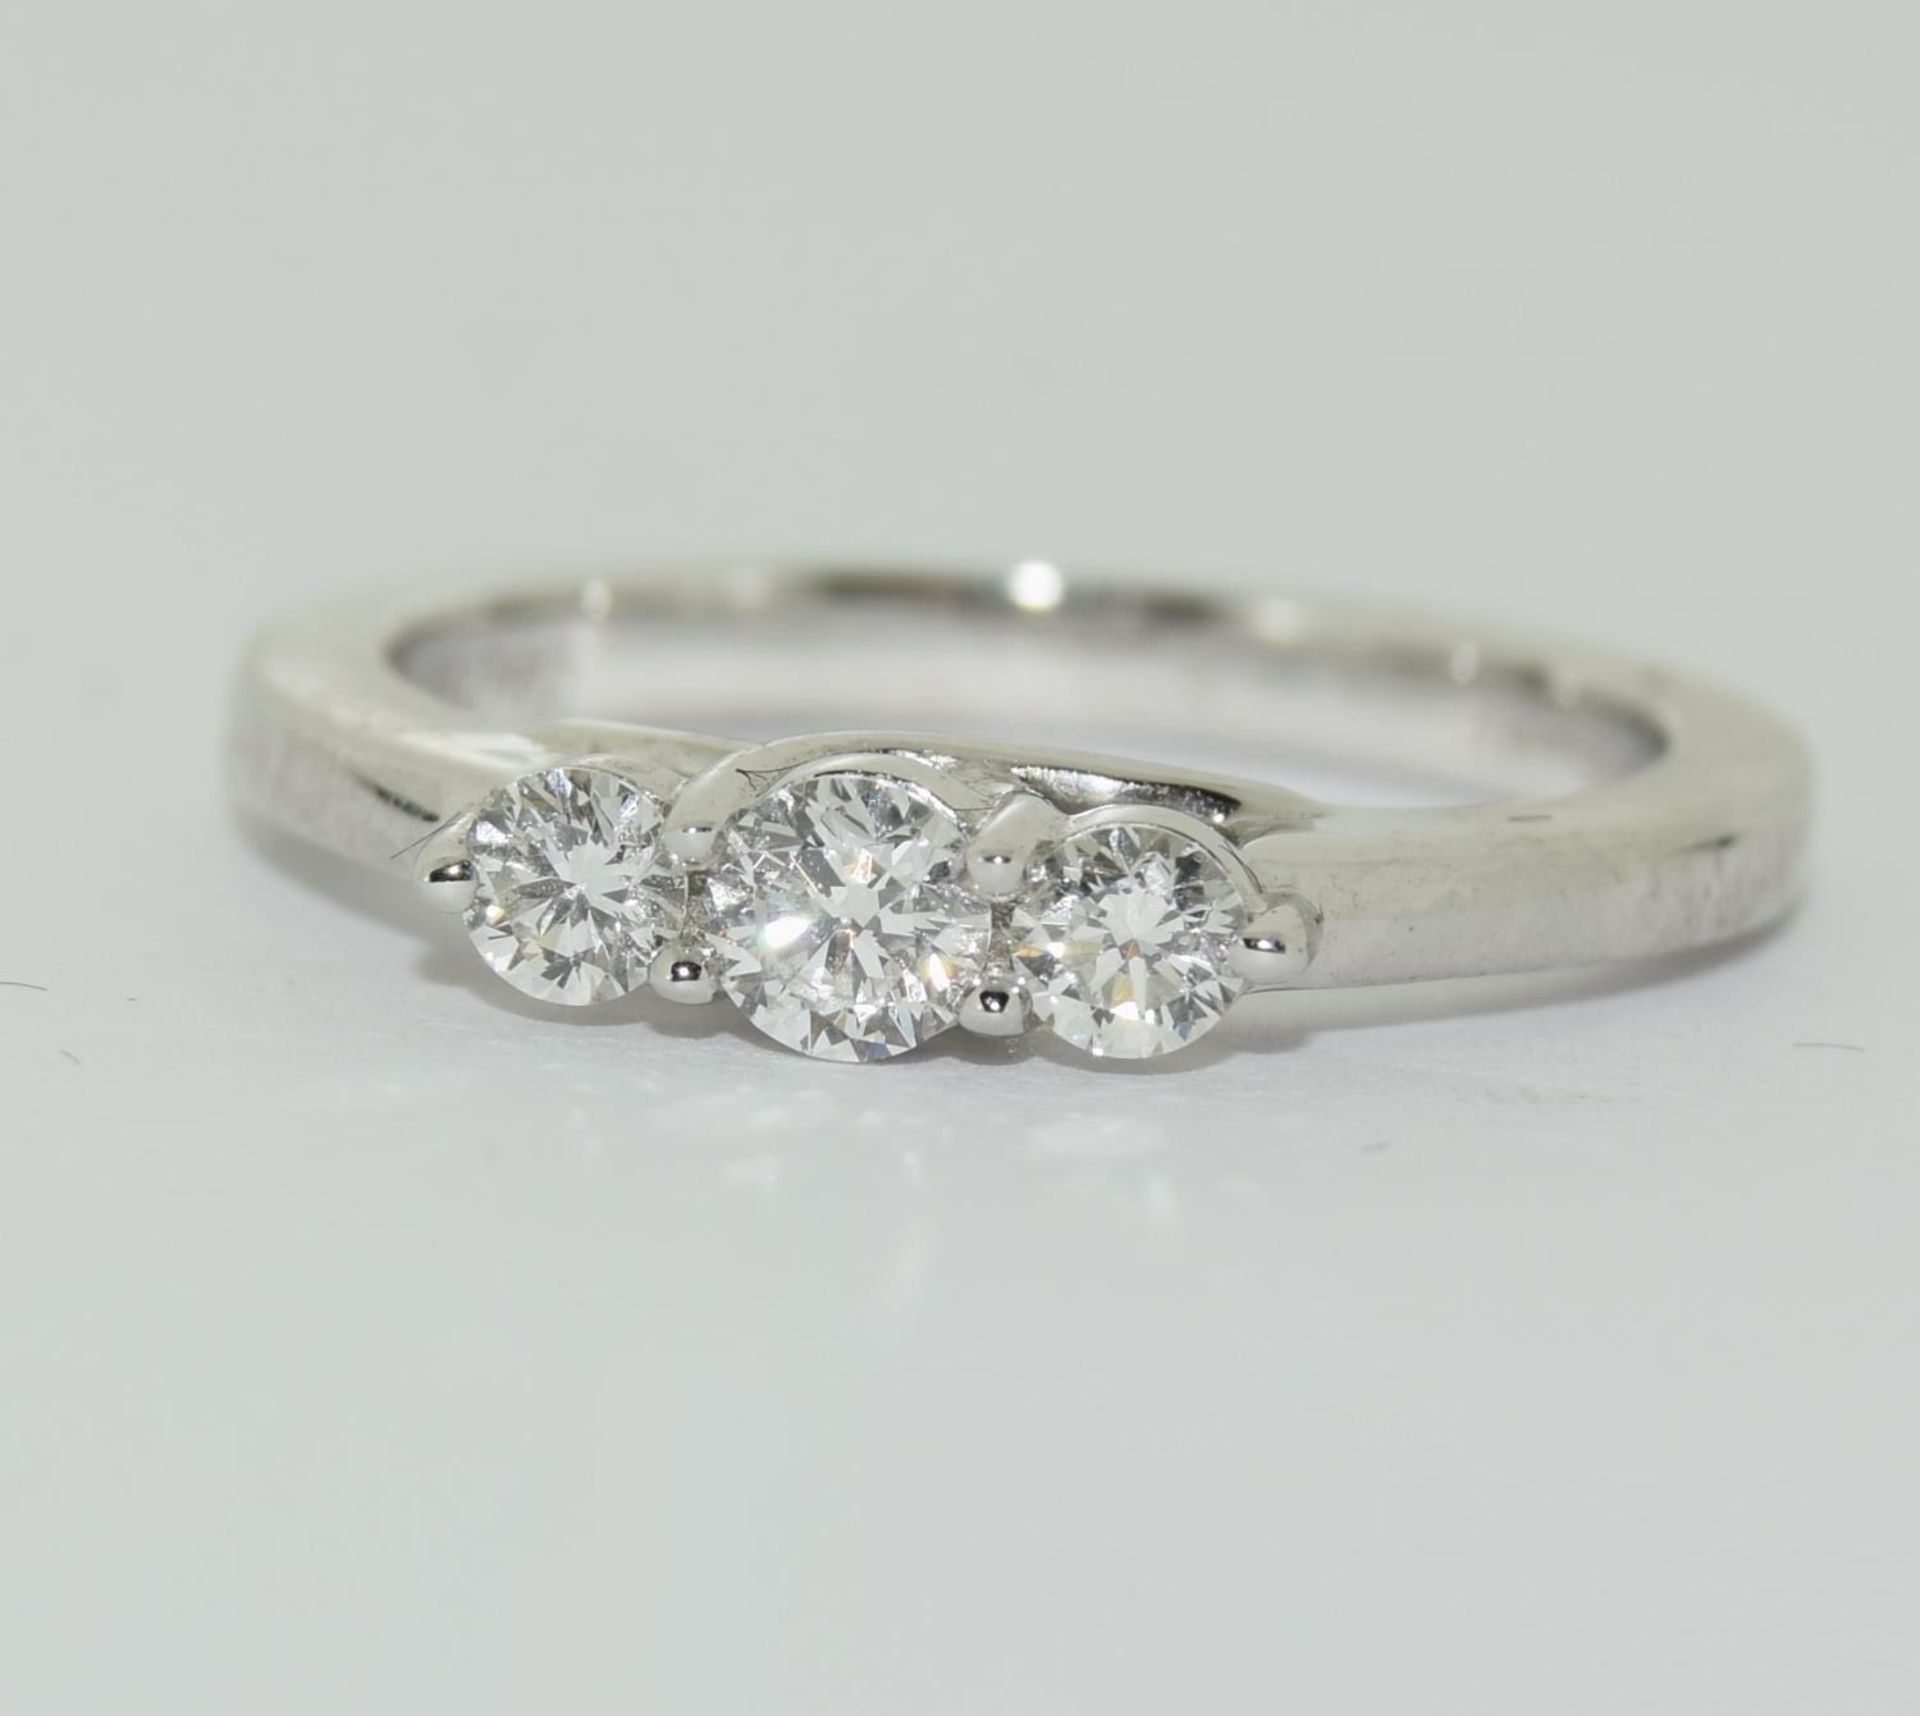 An 18ct white gold 3 graduated, claw set brilliant cut diamonds ring, total diamond weight 0.33ct. - Image 5 of 5